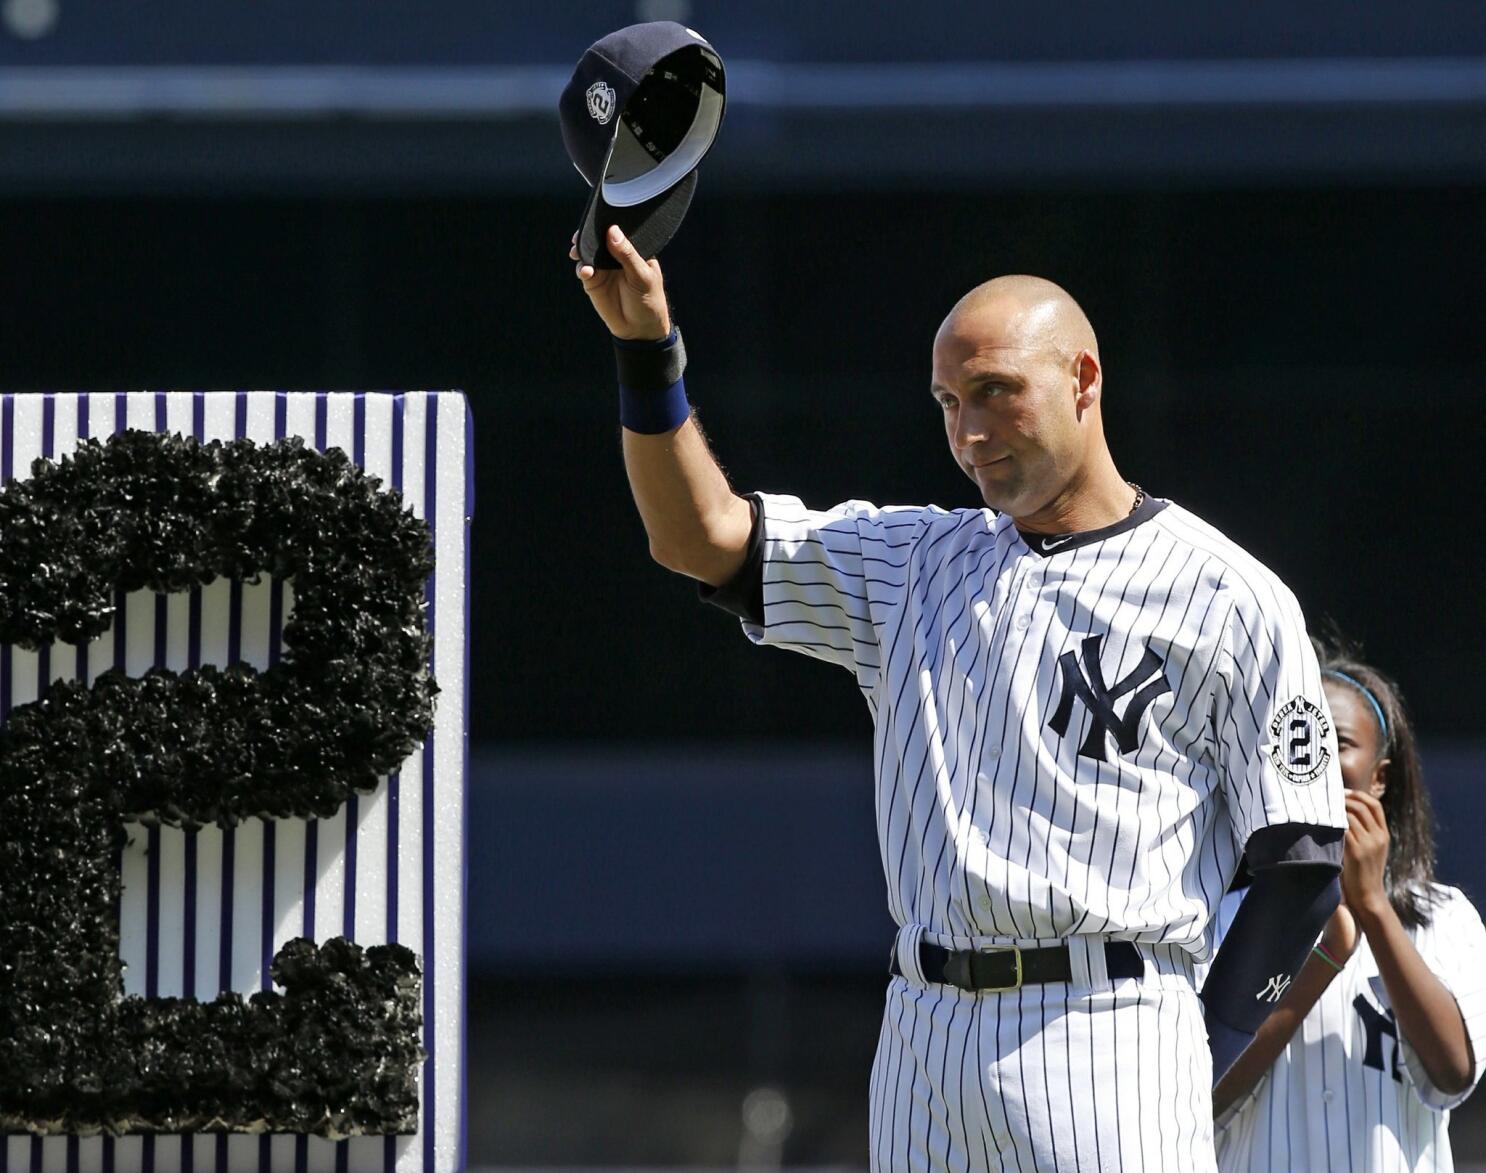 Derek Jeter drops message for Paul O'Neill after Yankees retire his number